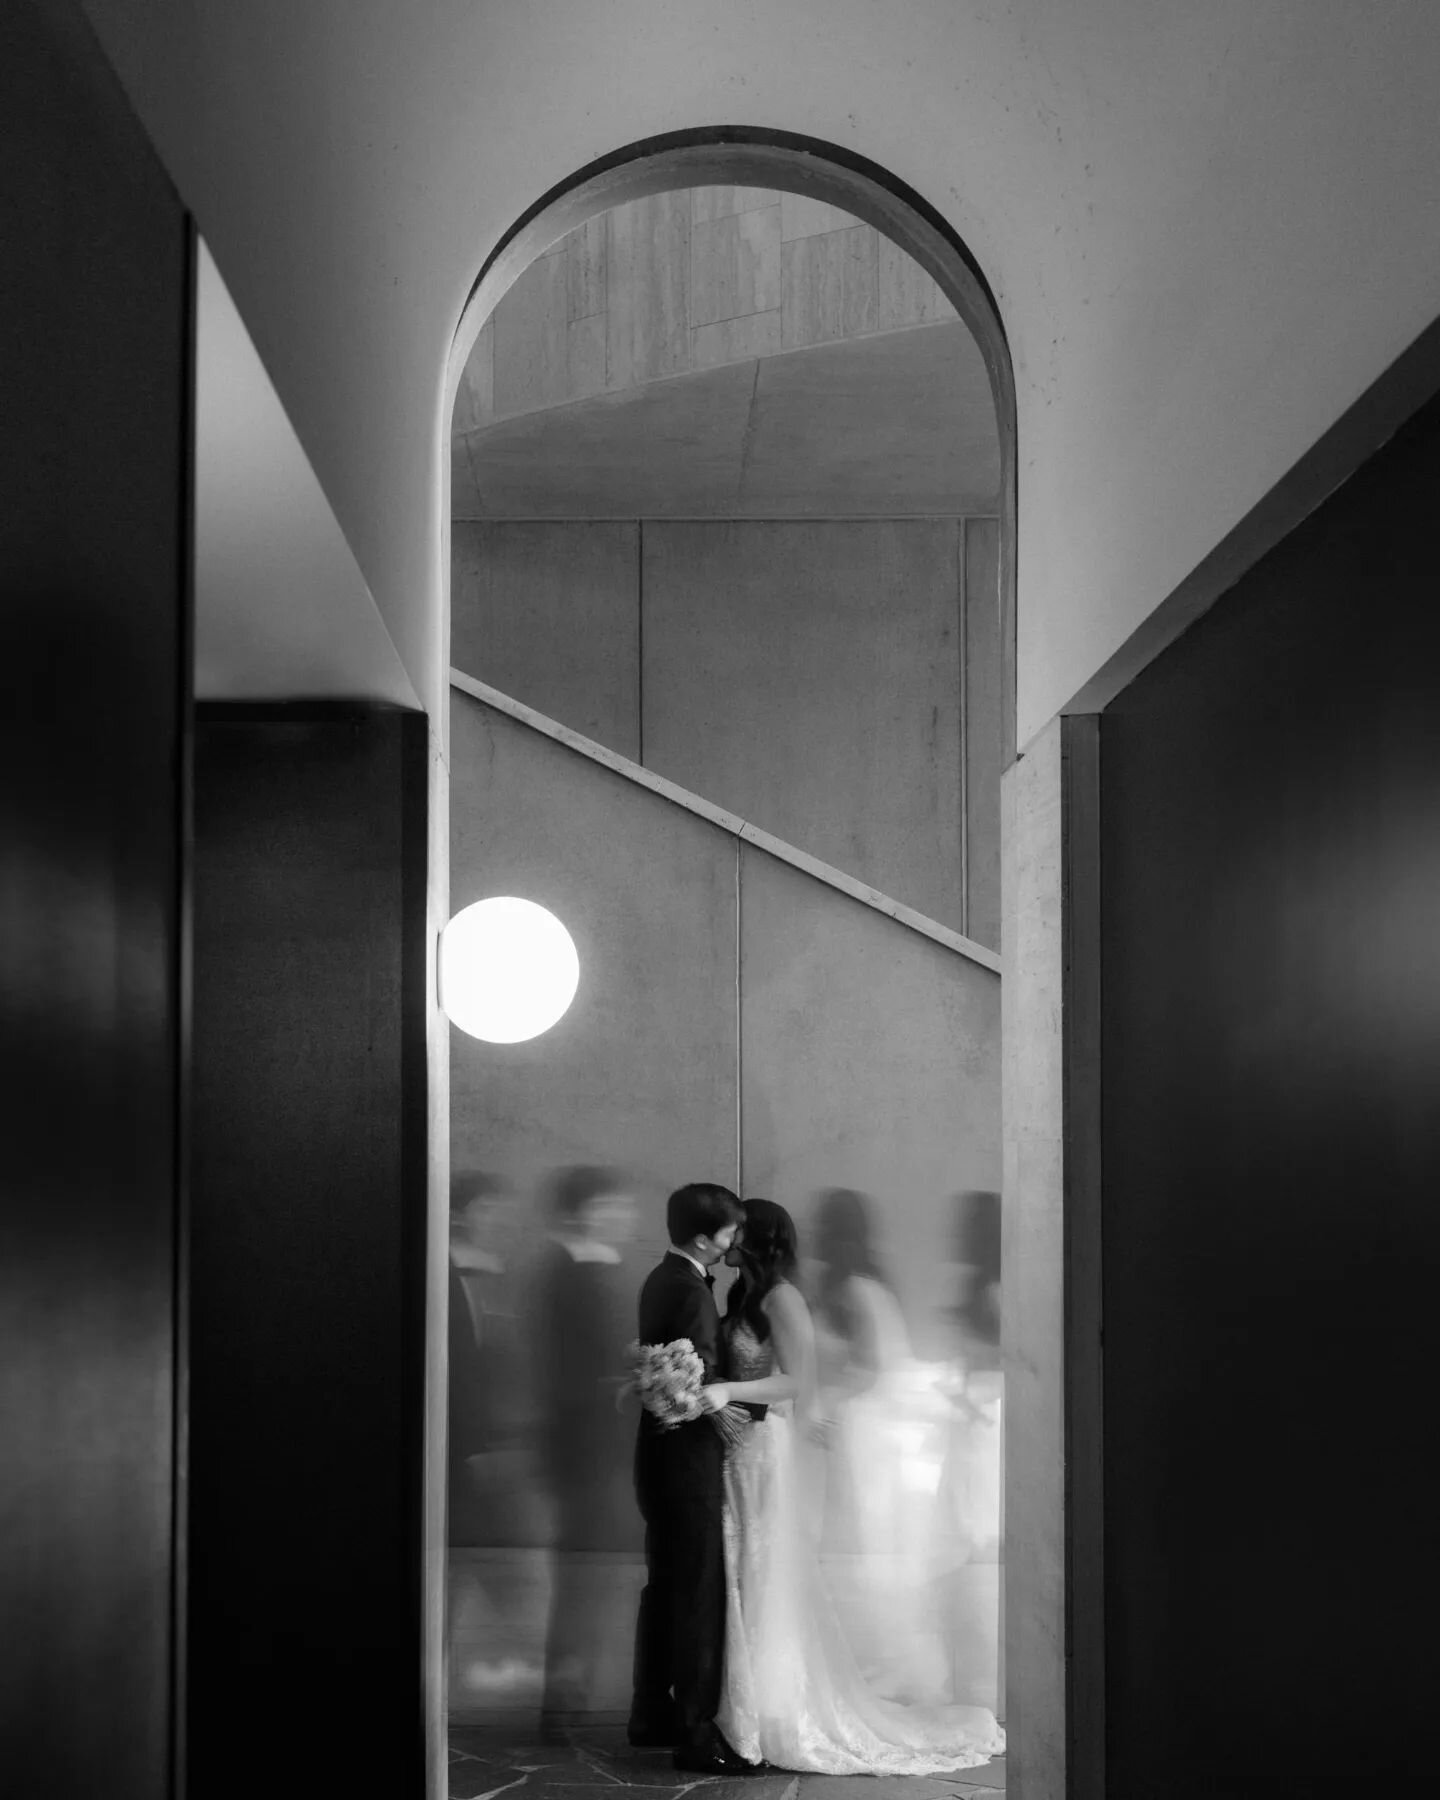 Jay &amp; Alysha at the beautiful @thecalilehotel 
.
Edited by @wildernis.lab 
.
#calilehotel #calilehotelwedding #calilehotelbrisbane #calileweddings #brisbaneweddingphotography #brisbaneweddingphotographer